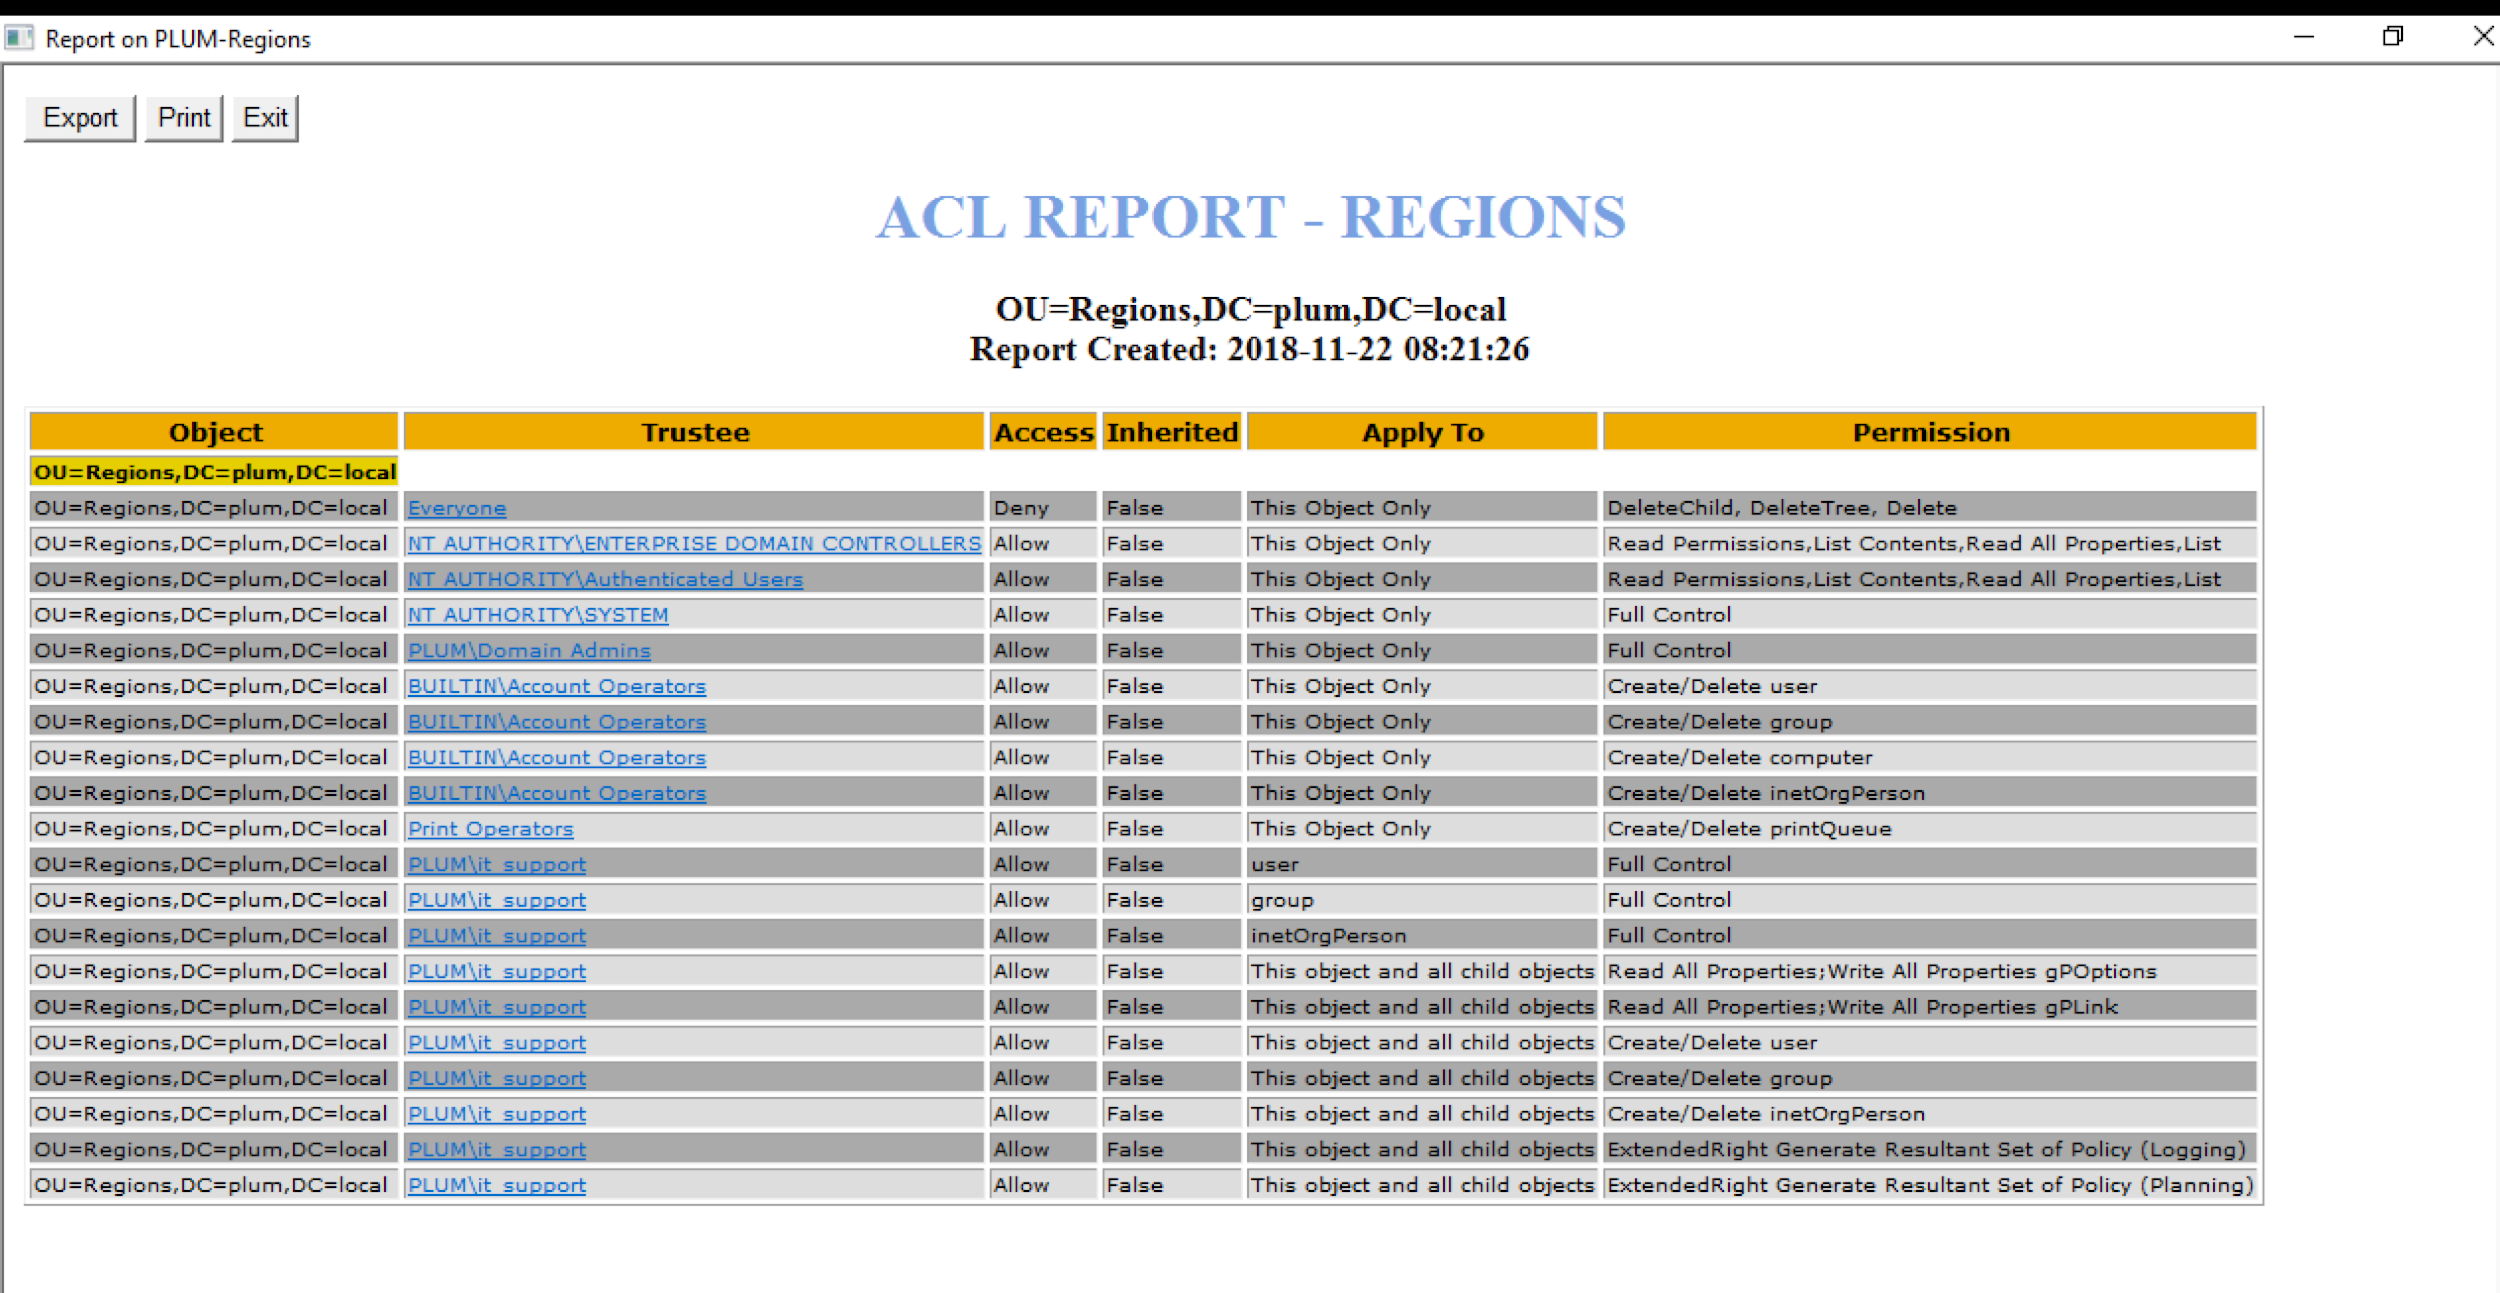 ACL Report for Regions OU